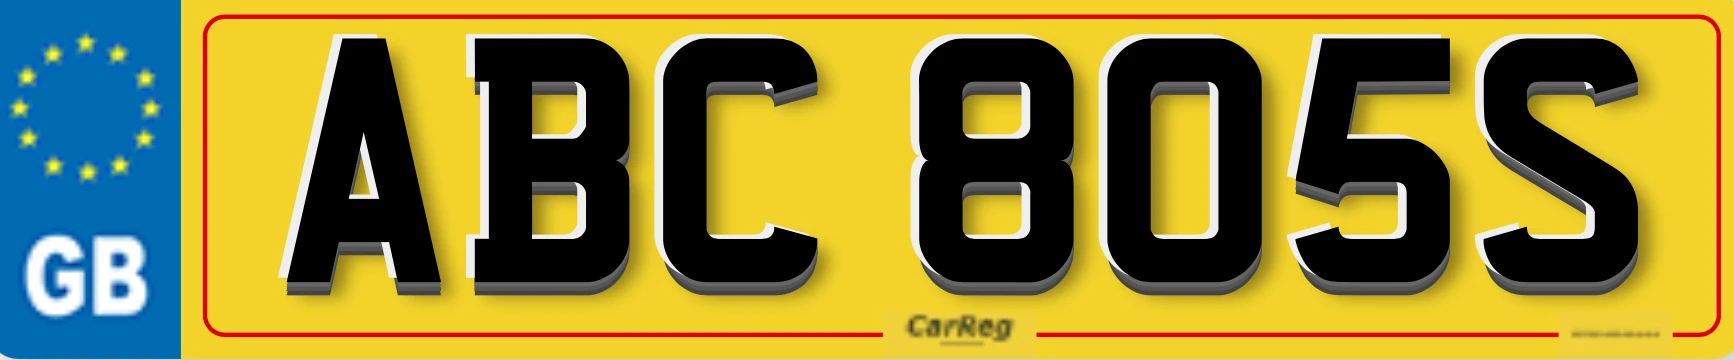 Important Law Change For UK Number Plates